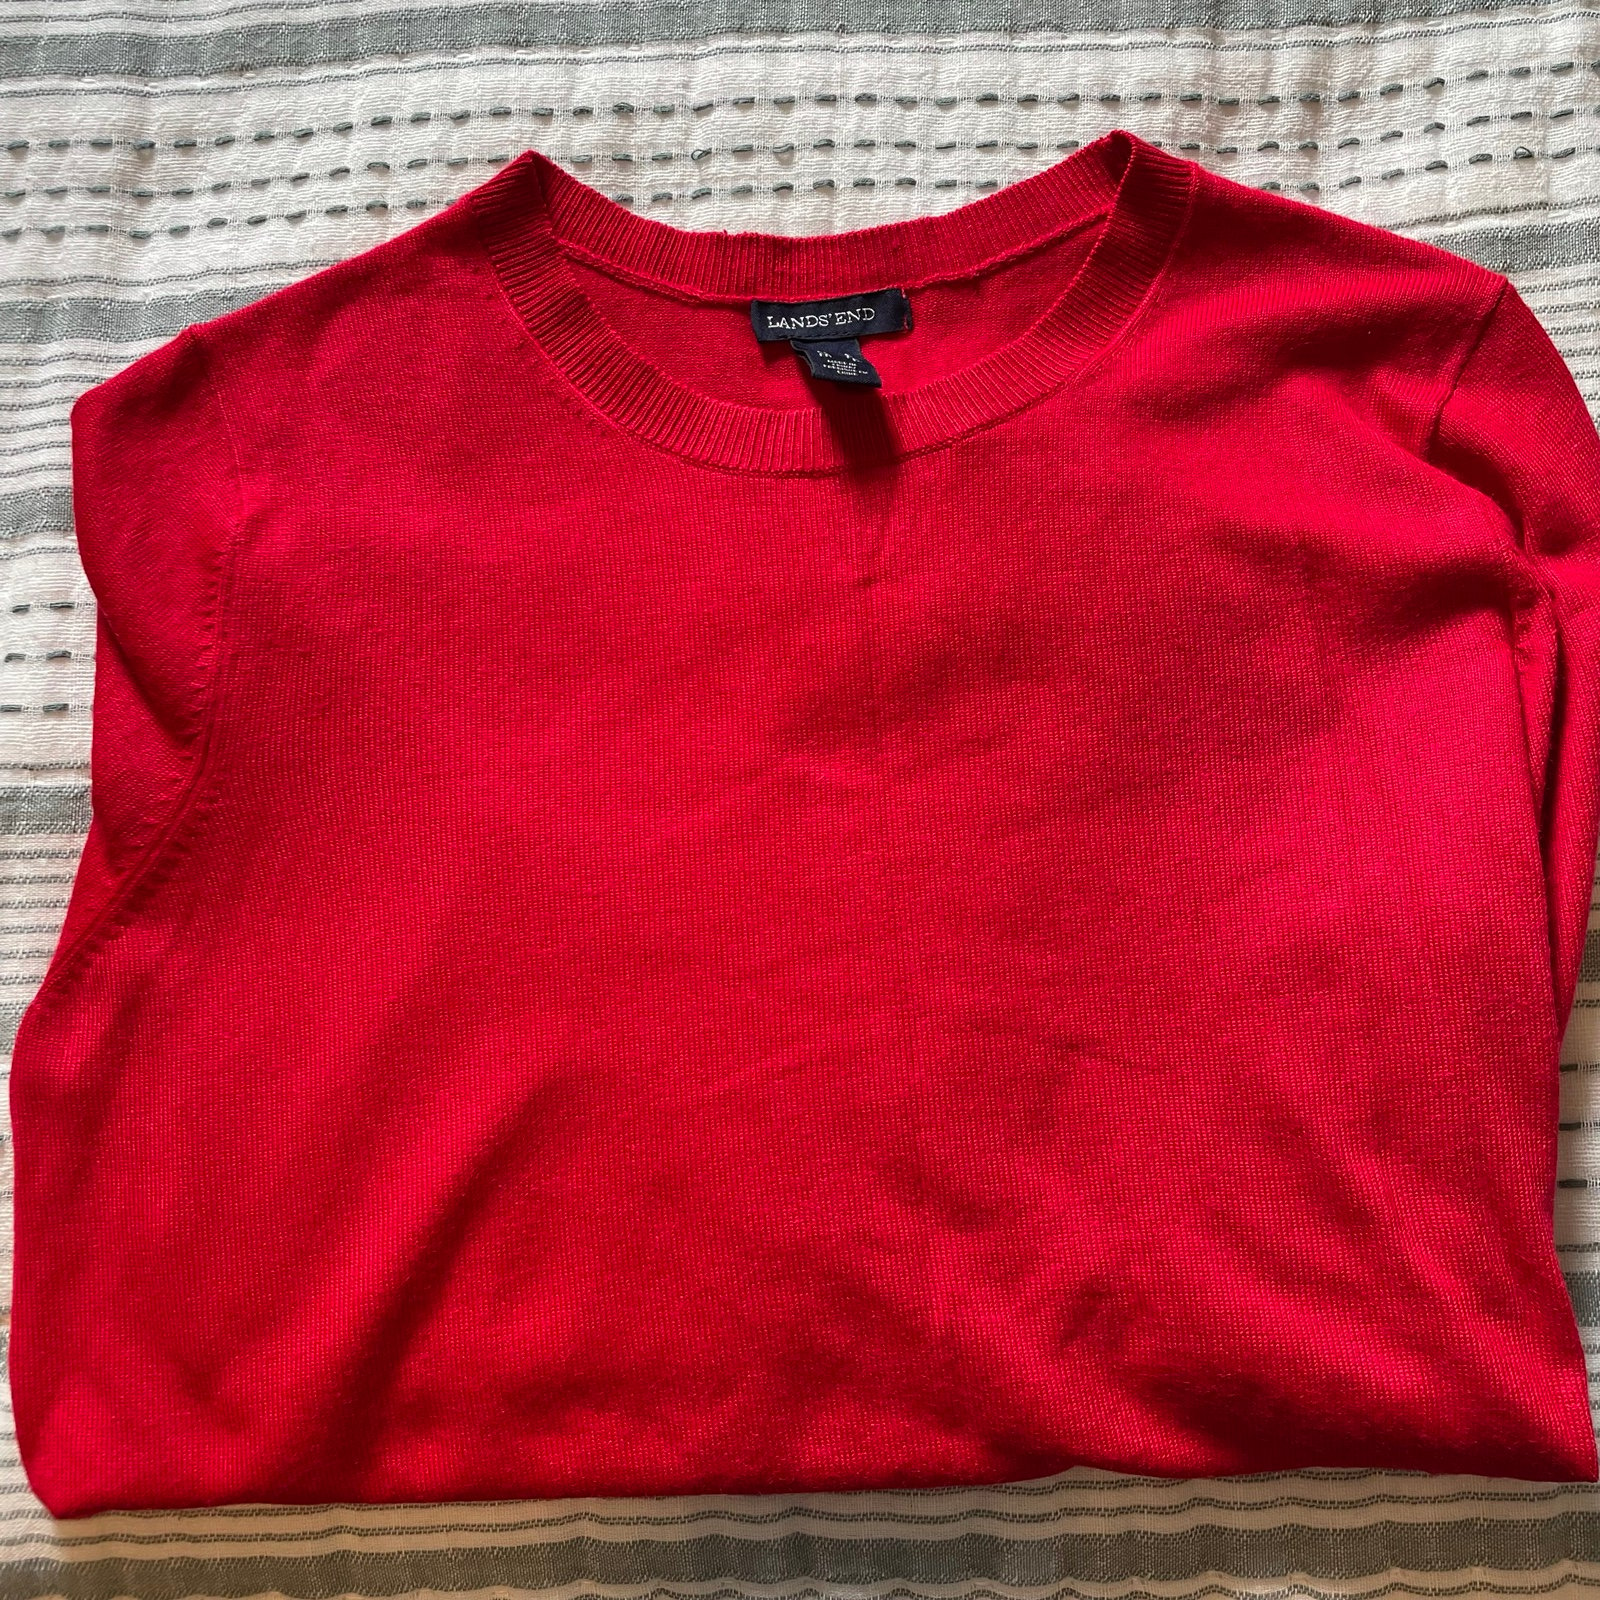 high discount Lands End Red Sweater Womens PLnBYOBQr Everyday Low Prices